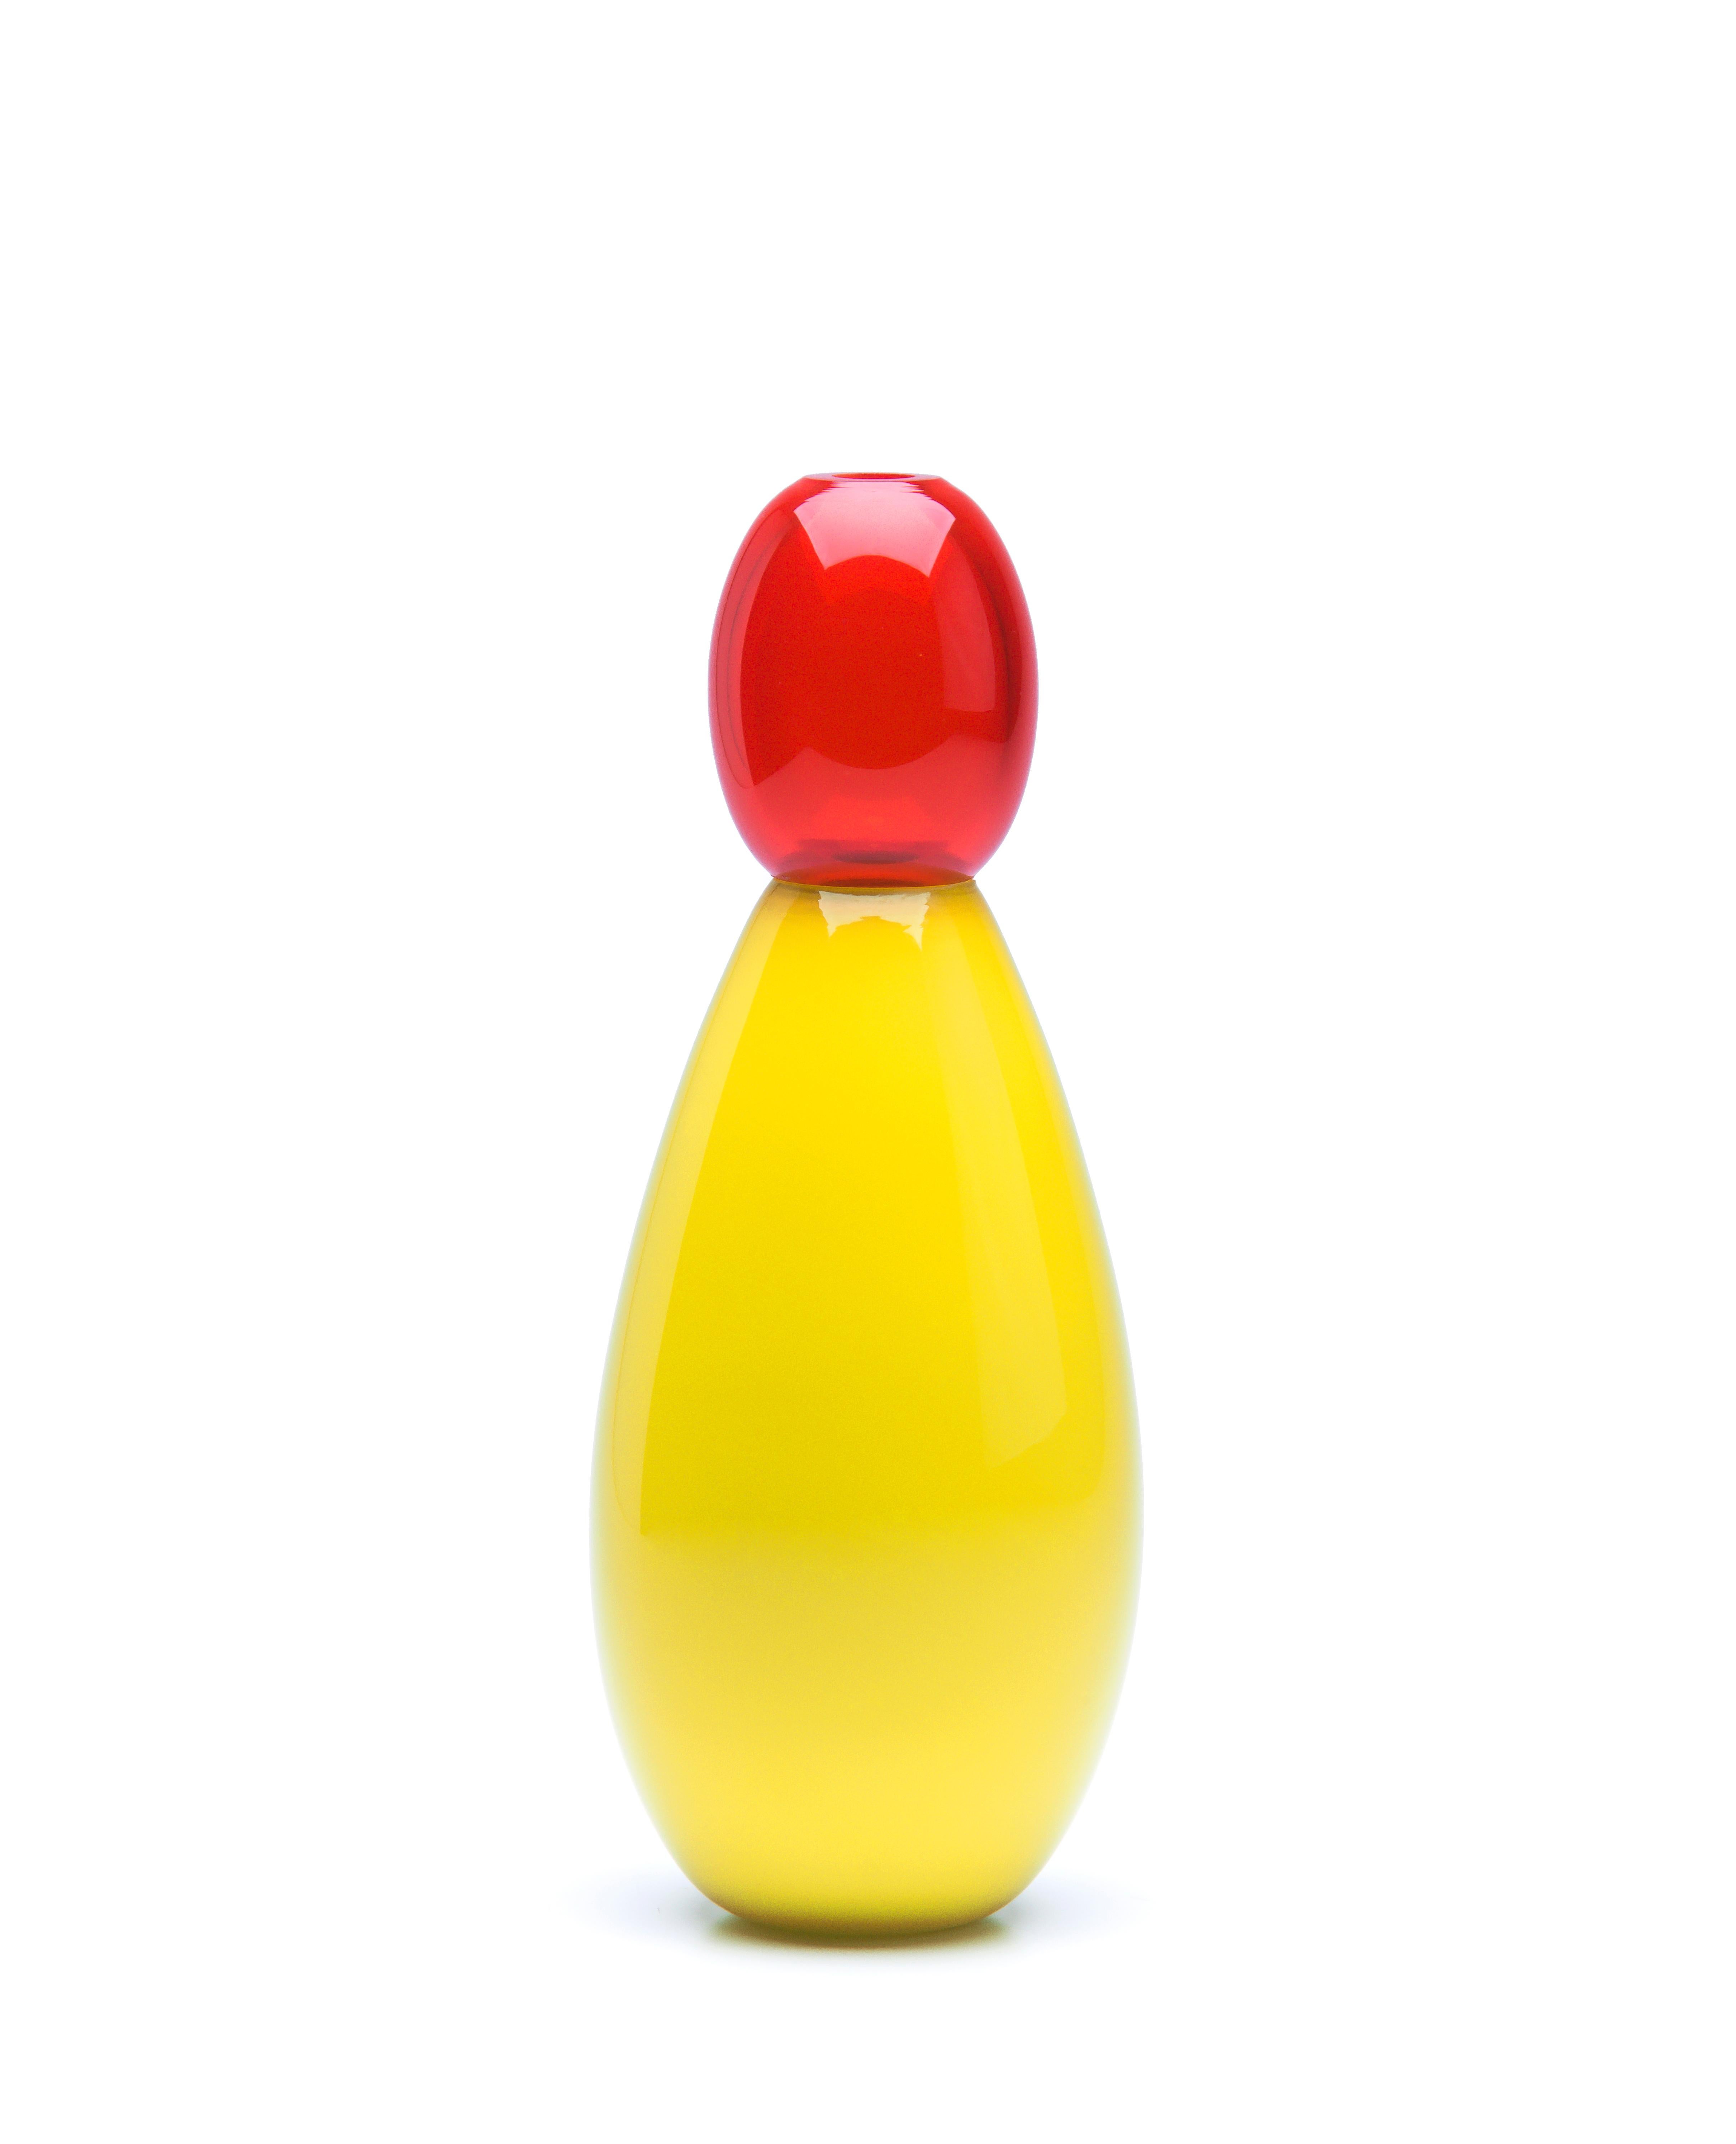 King yellow vase by Purho
Dimensions: D20 x H40 cm
Materials: Glass
Other colors and dimensions are available.

Purho is a new protagonist of made in Italy design, a work of synthesis, a research that has lasted for years, an Italian soul and